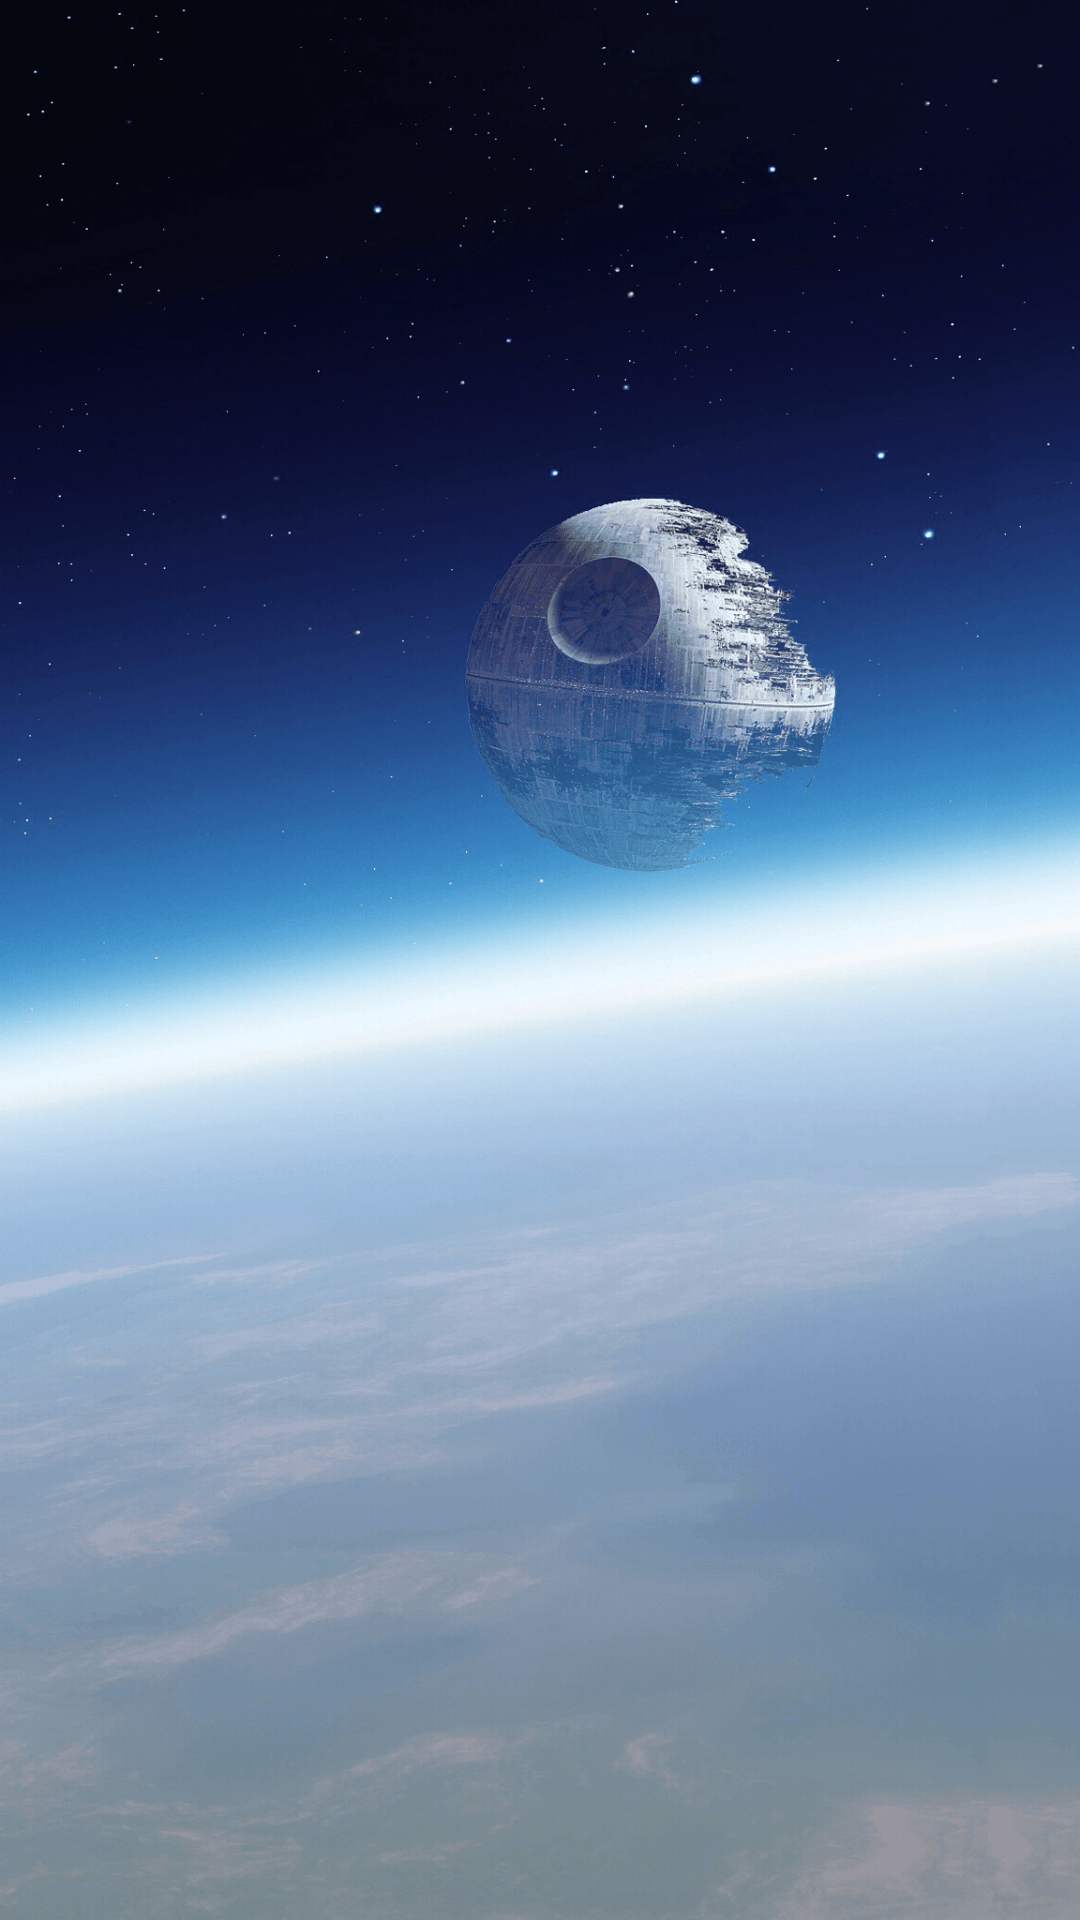 Star Wars Space Scenery Wallpapers